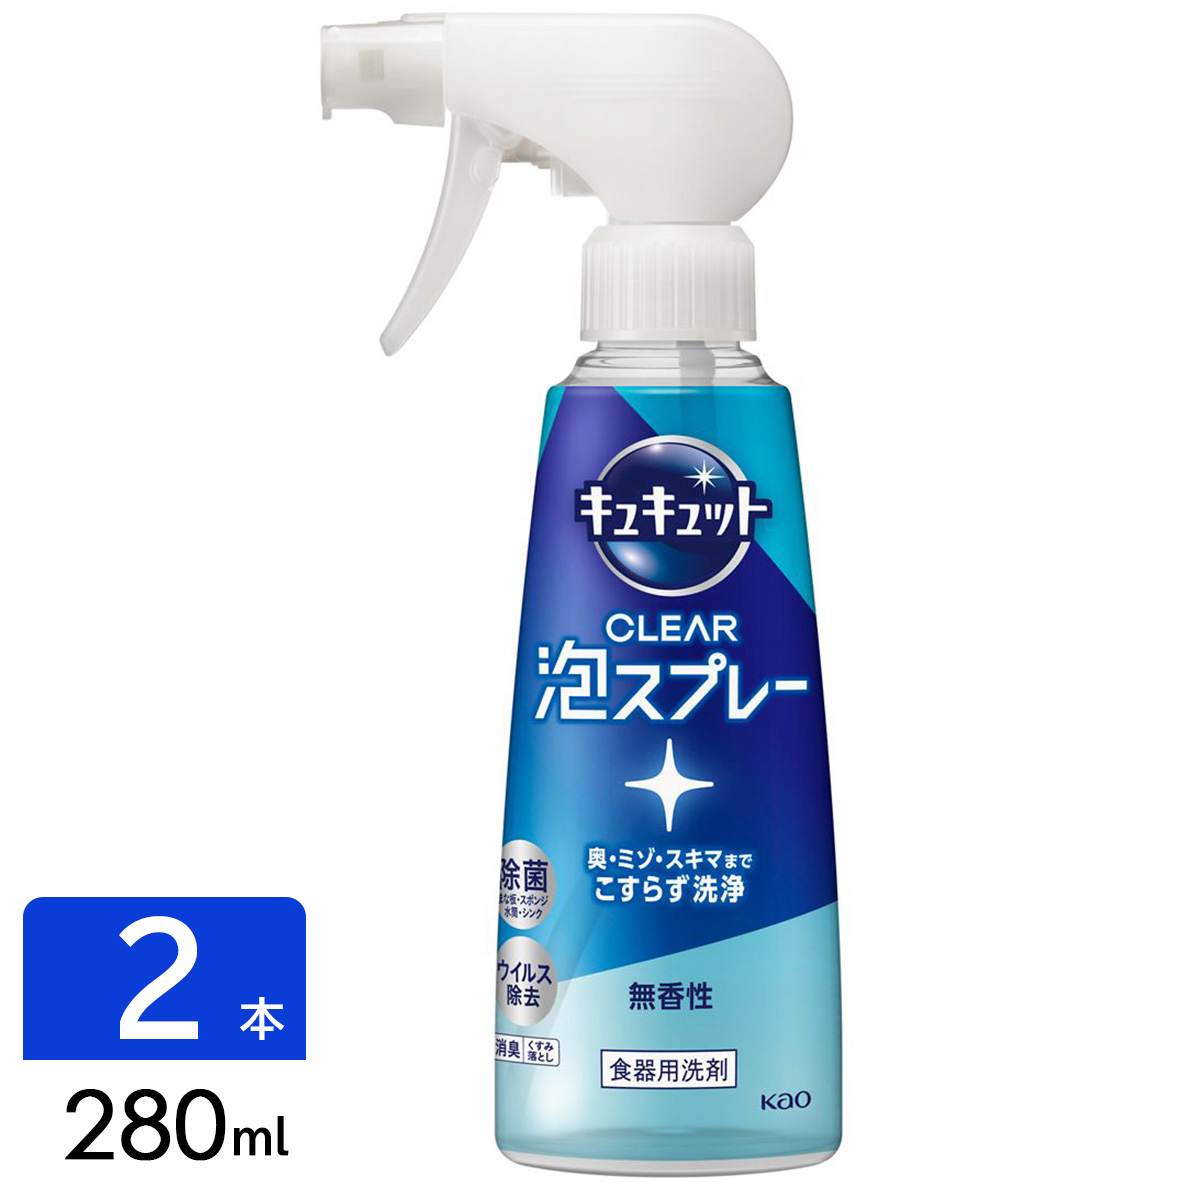 Kao キュキュット CLEAR 泡スプレー 無香性 本体 280ml ×2 キュキュット 台所用洗剤の商品画像